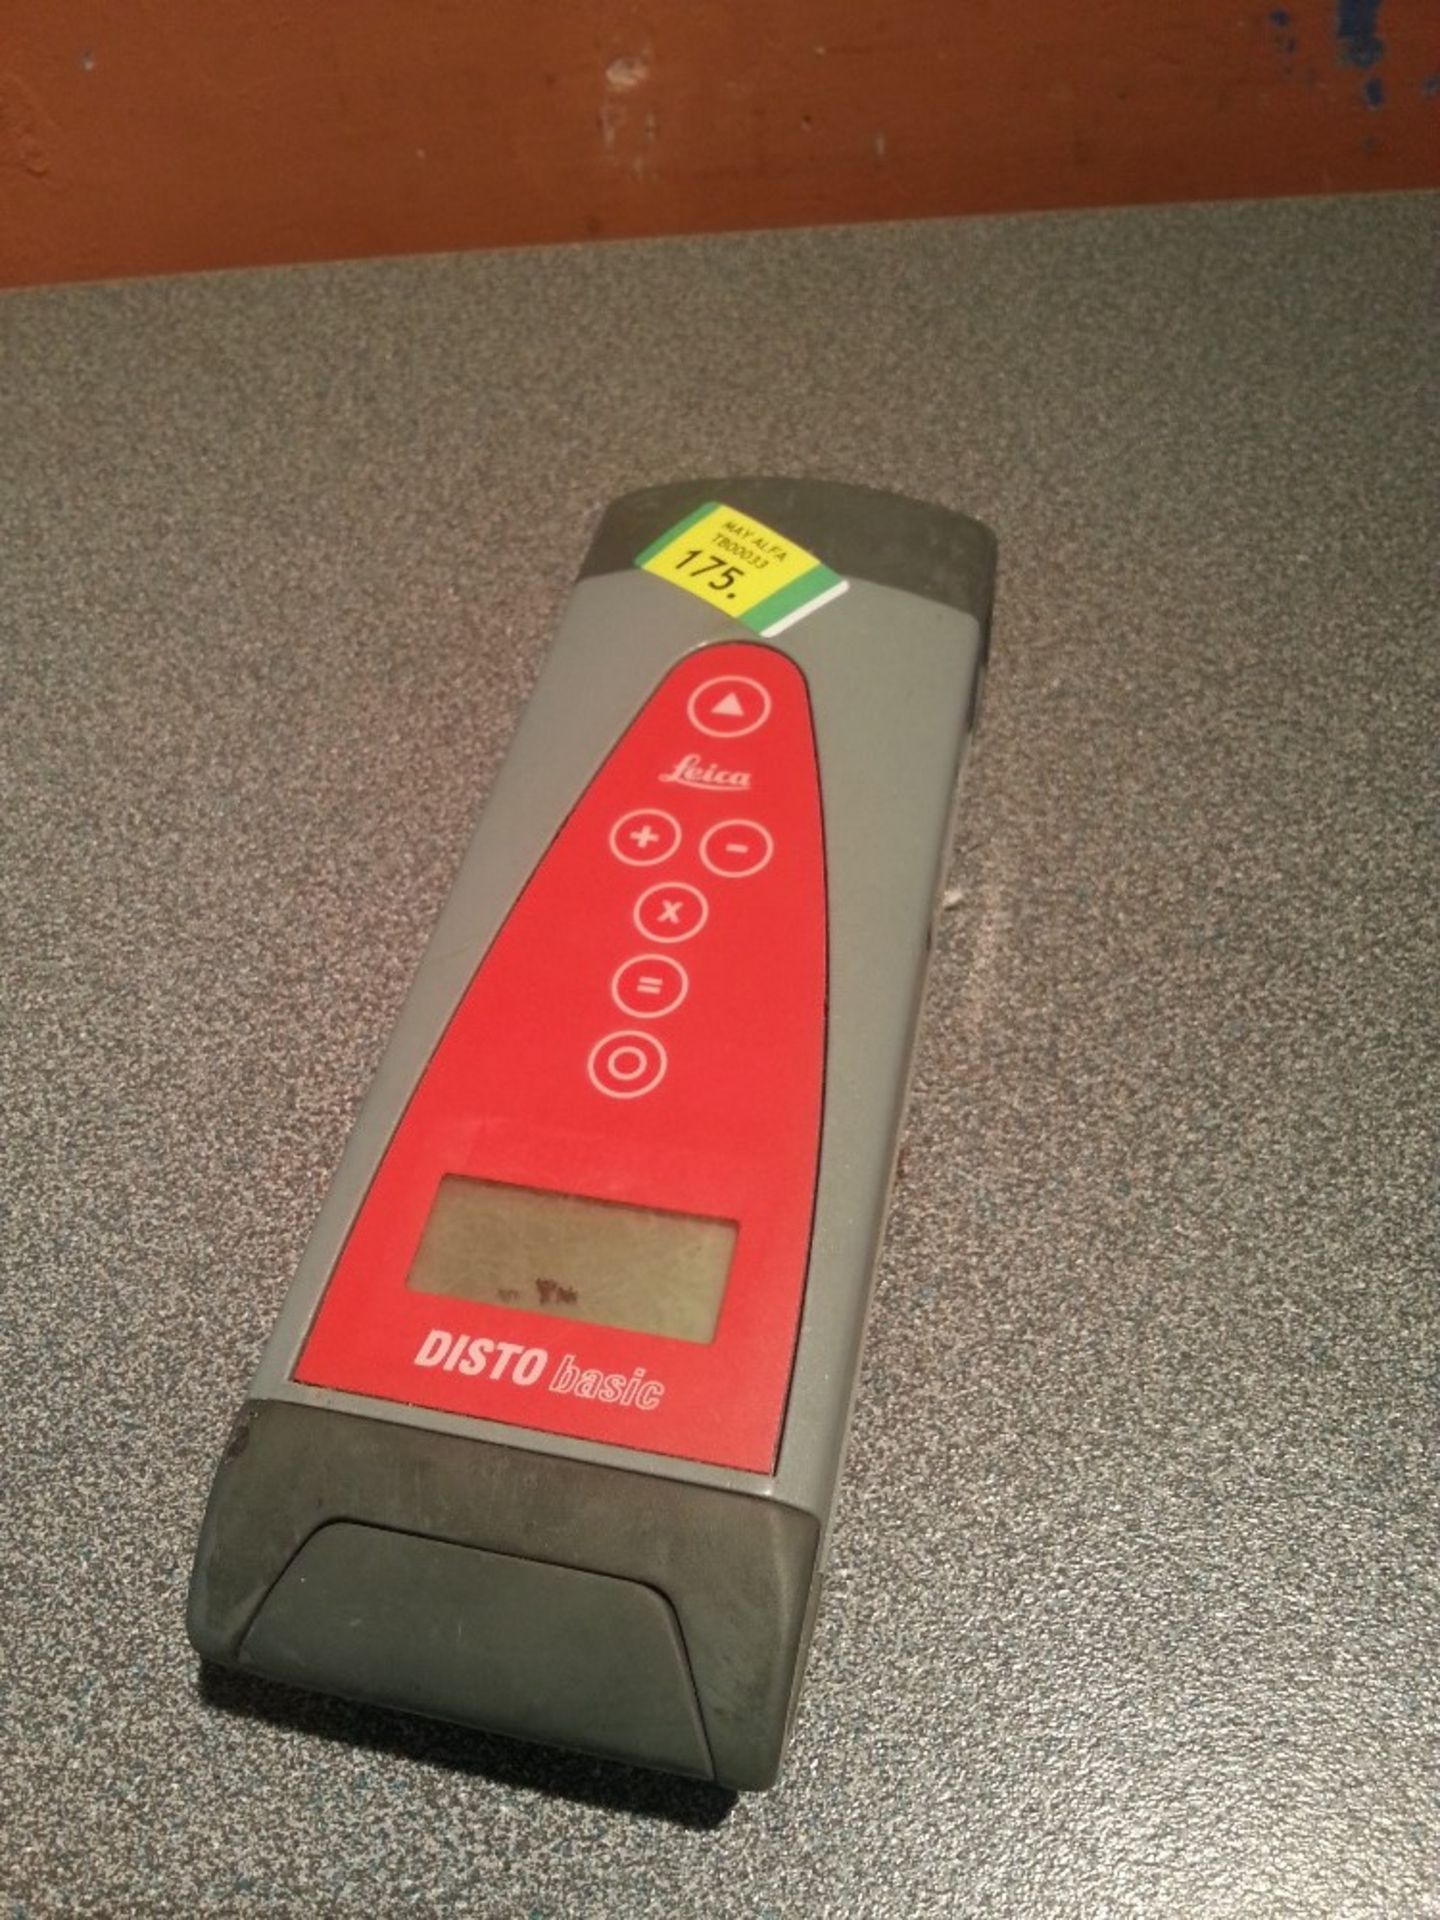 LEICA  Distro Basic Laser Measure - Powers On - Marks To Screen